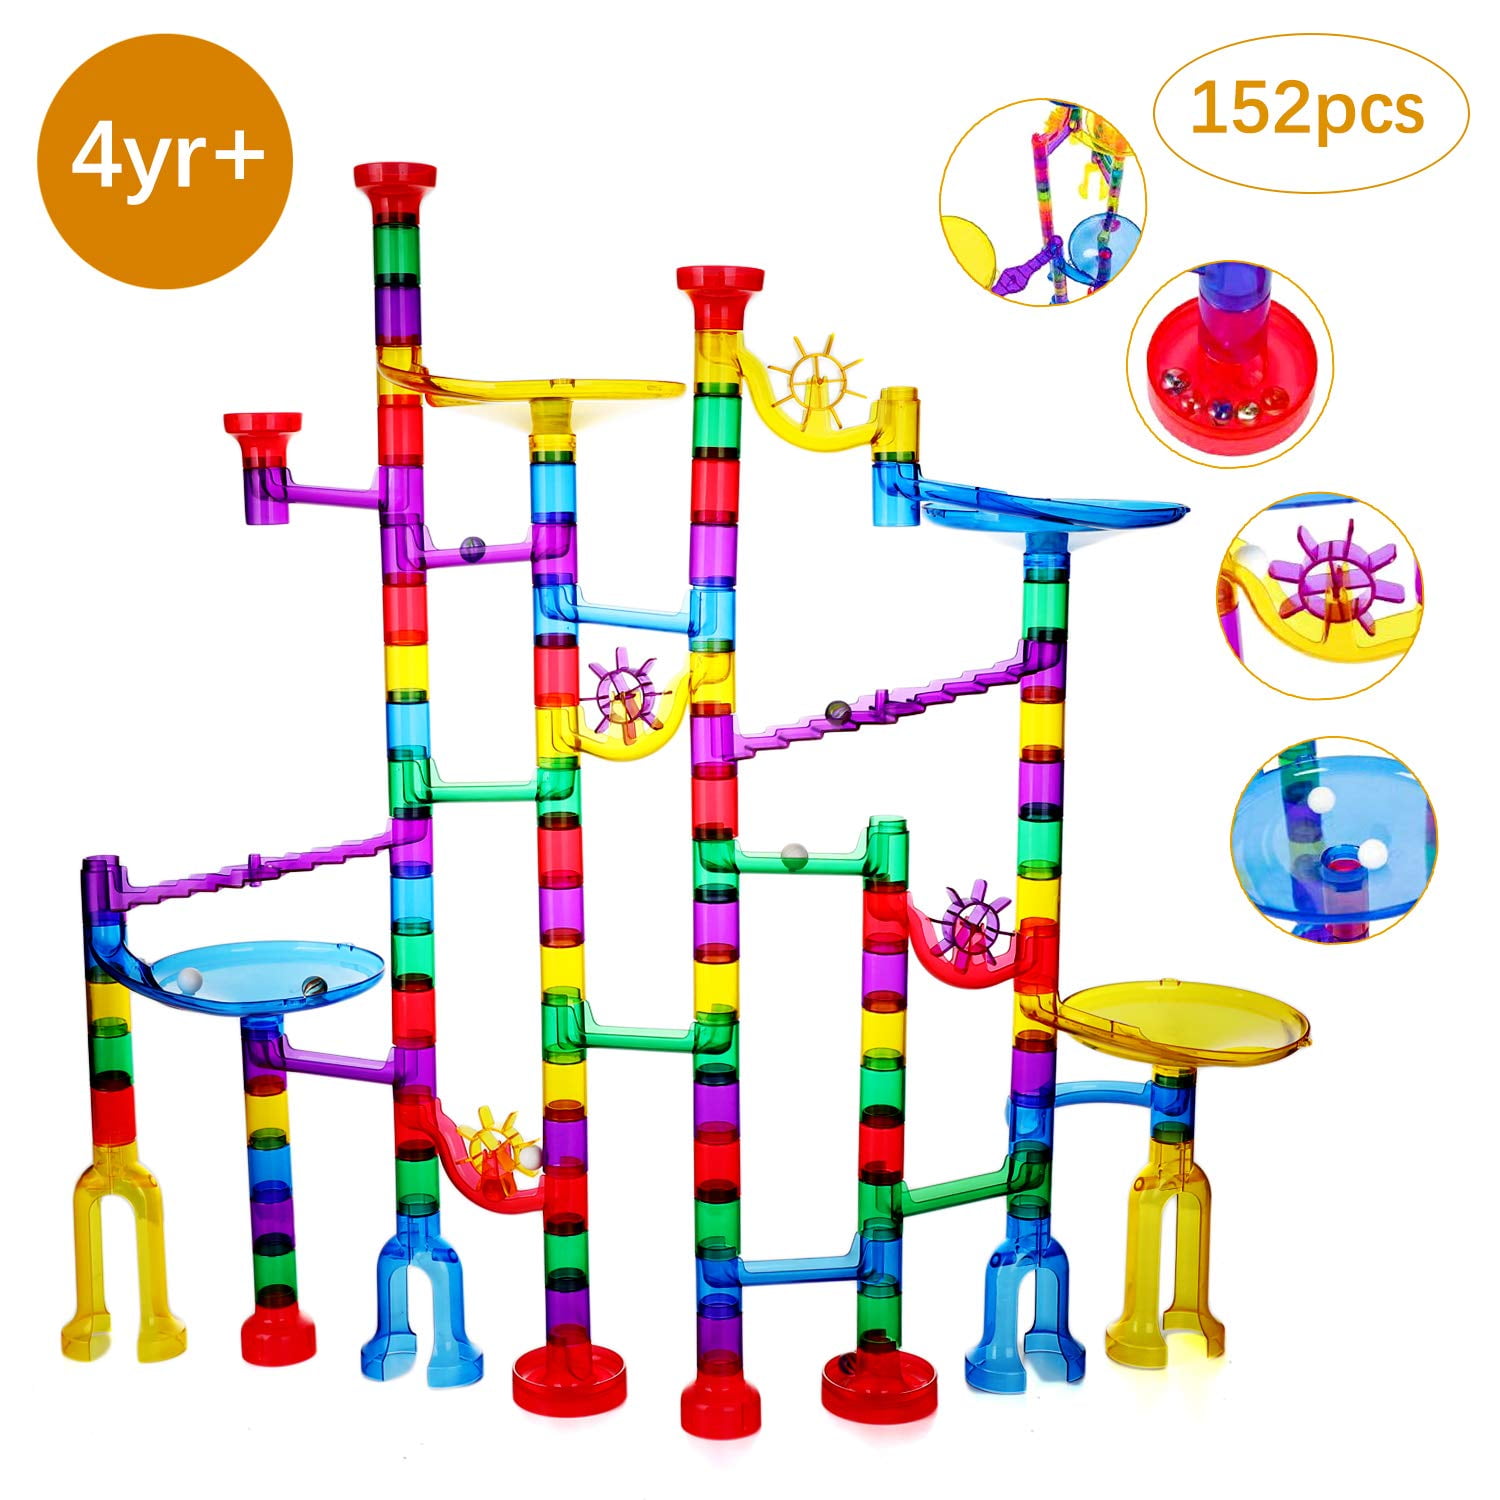 Bobury Unique Wood Tree Leaves Blocks Marble Ball Run Track Game Toy Children Educational Toys